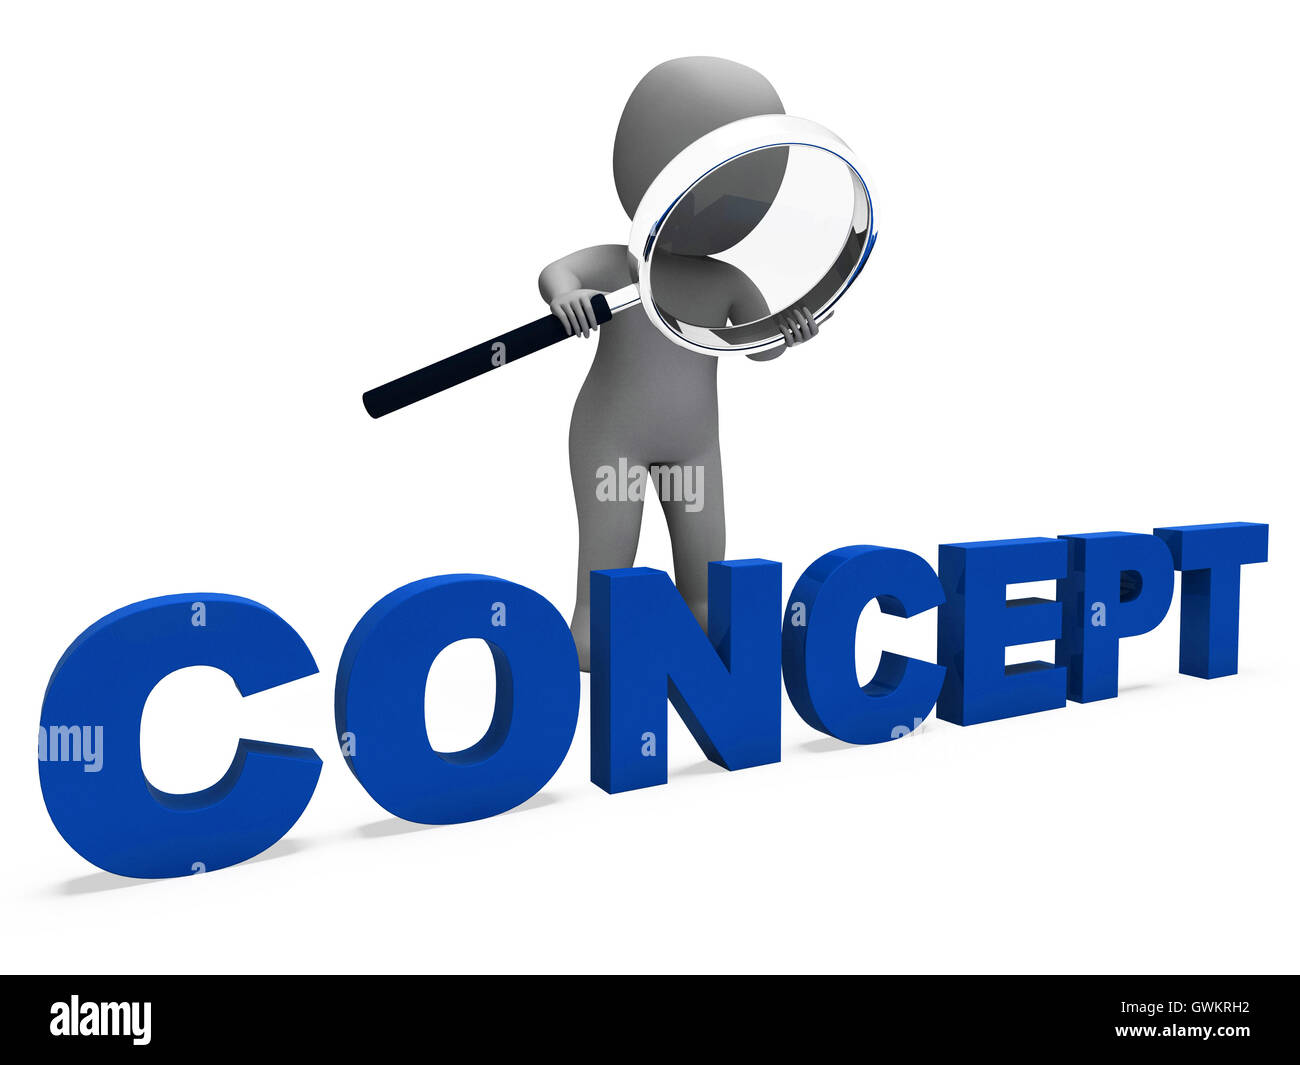 Concepts Character Shows Ideas Concept Or Inventions Stock Photo